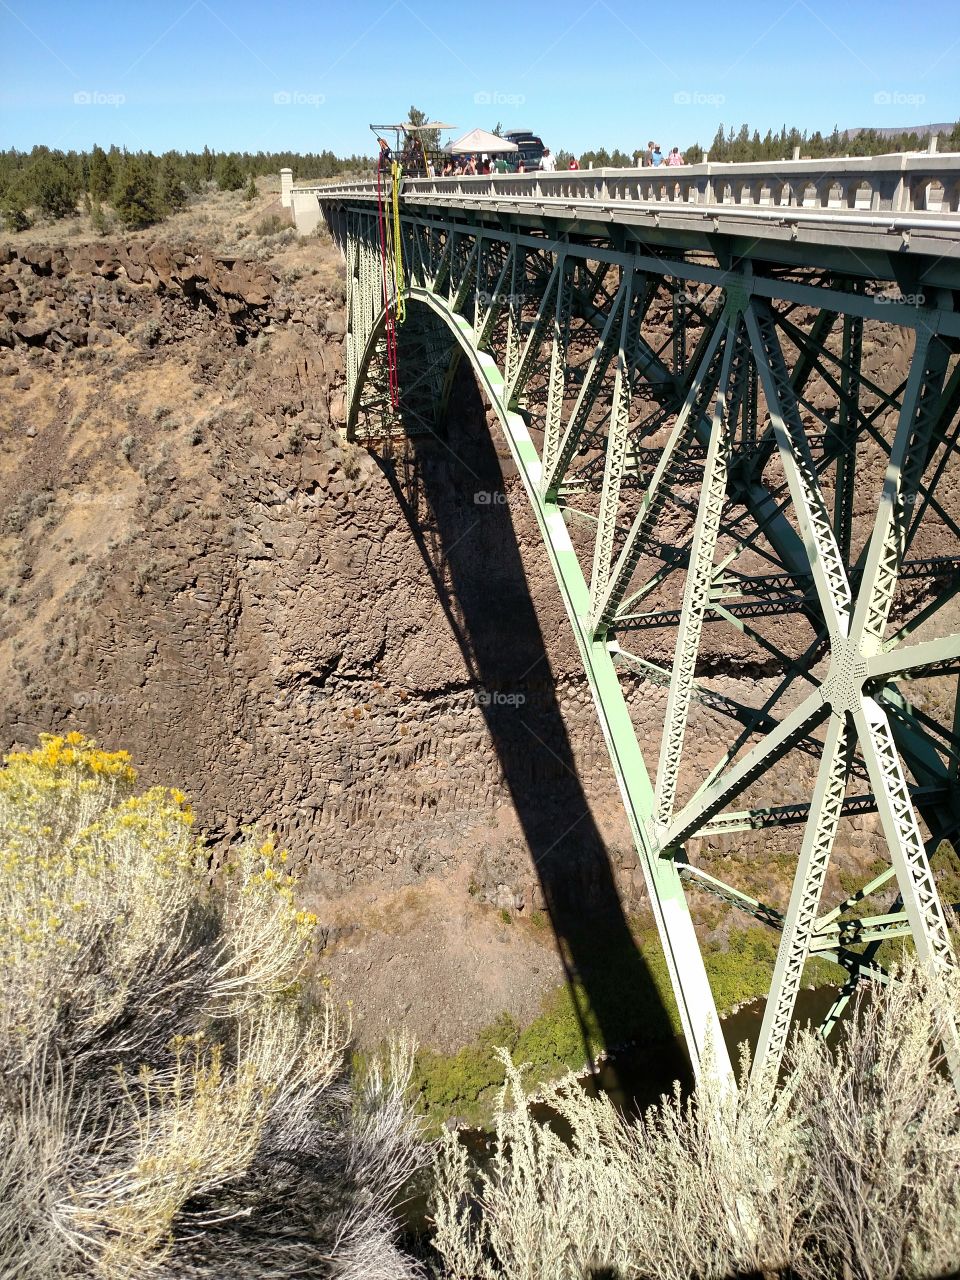 Bungee Jumper in Central Oregon